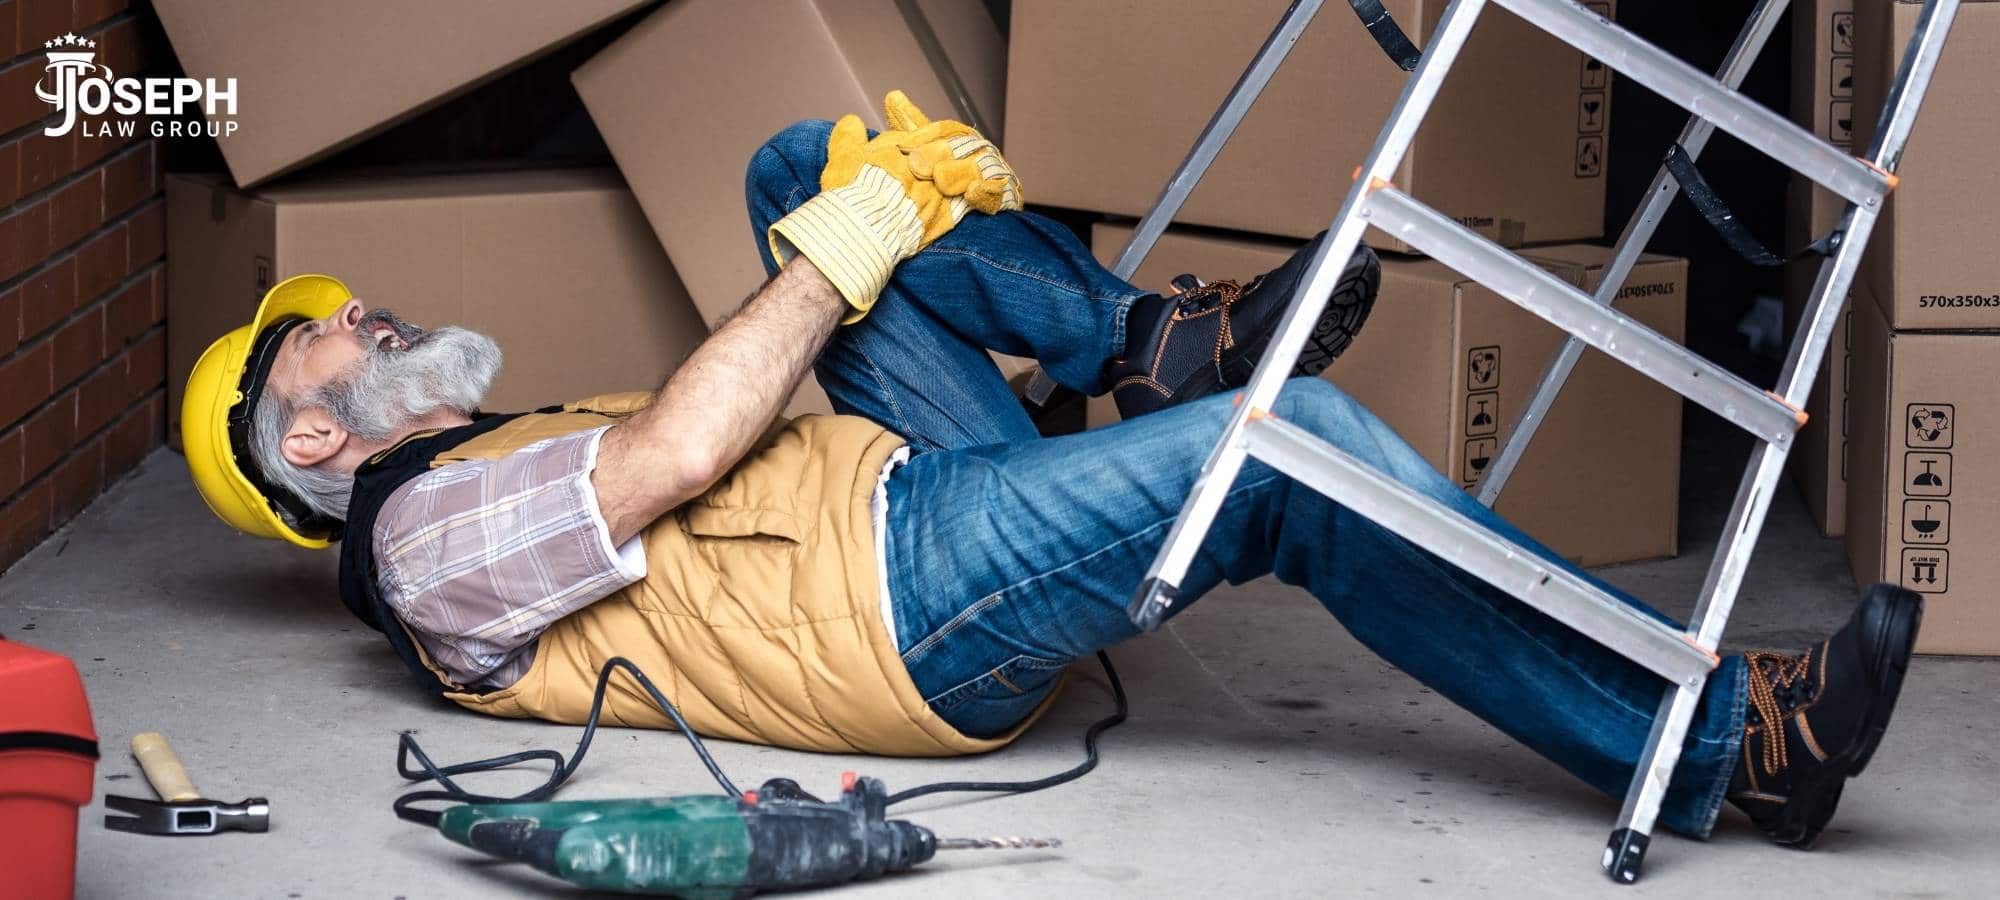 top workers compensation attorneys in ohio